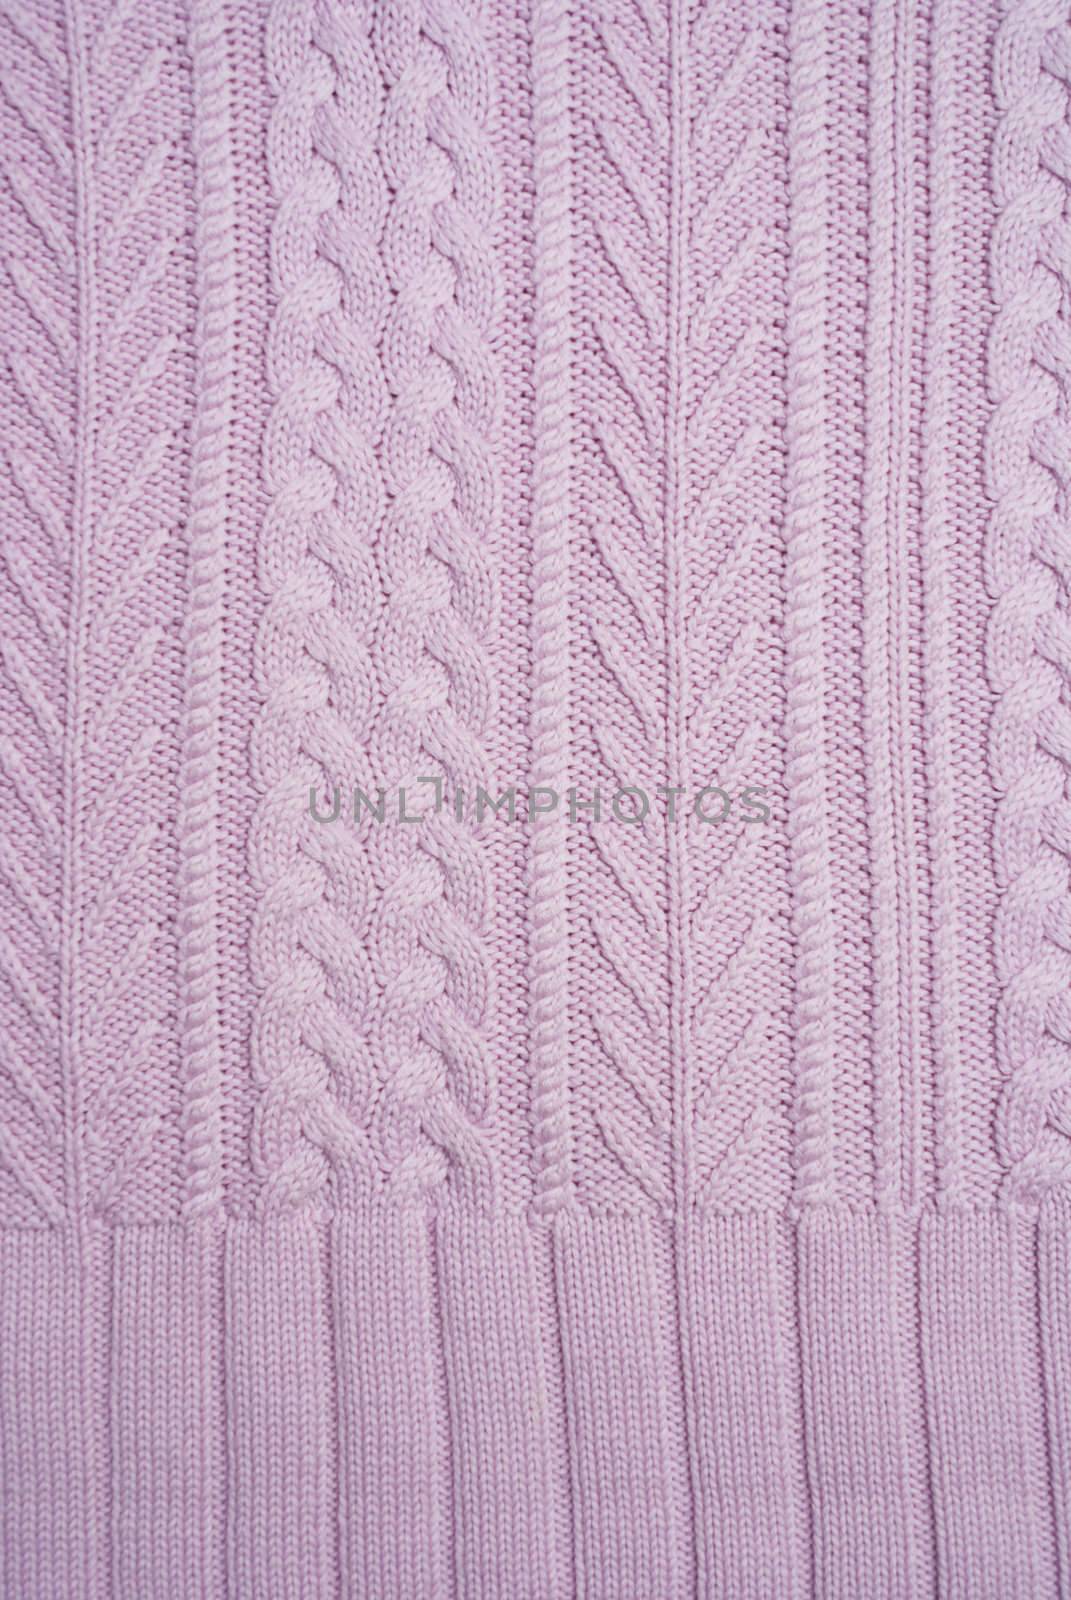 woolen knitted sweater of pink color